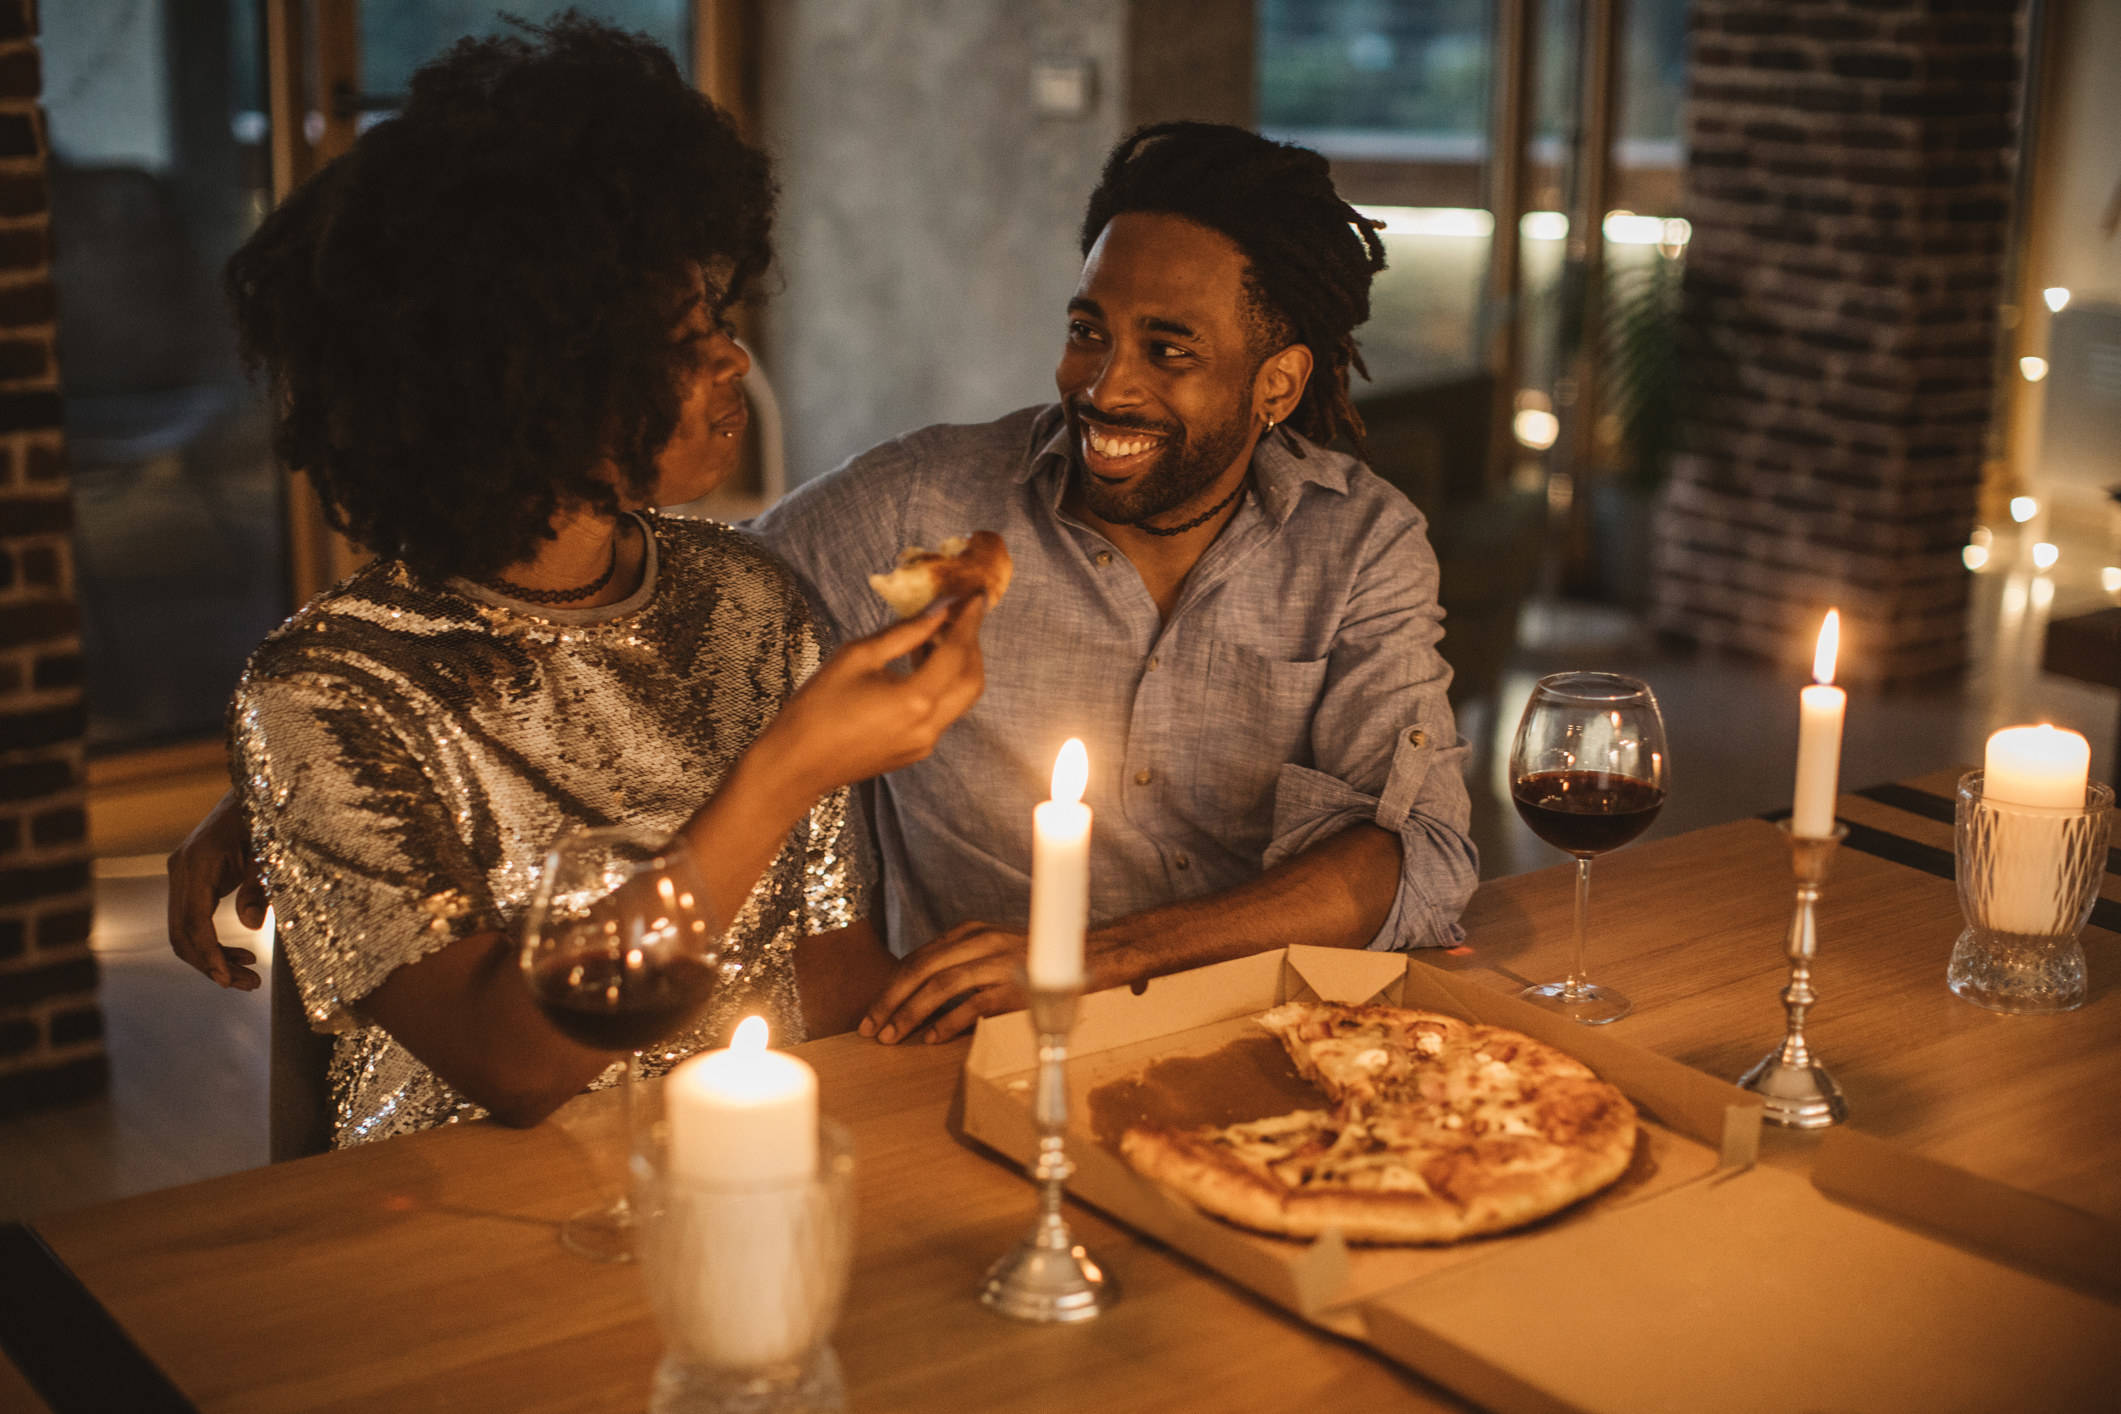 A couple enjoying pizza by candlelight